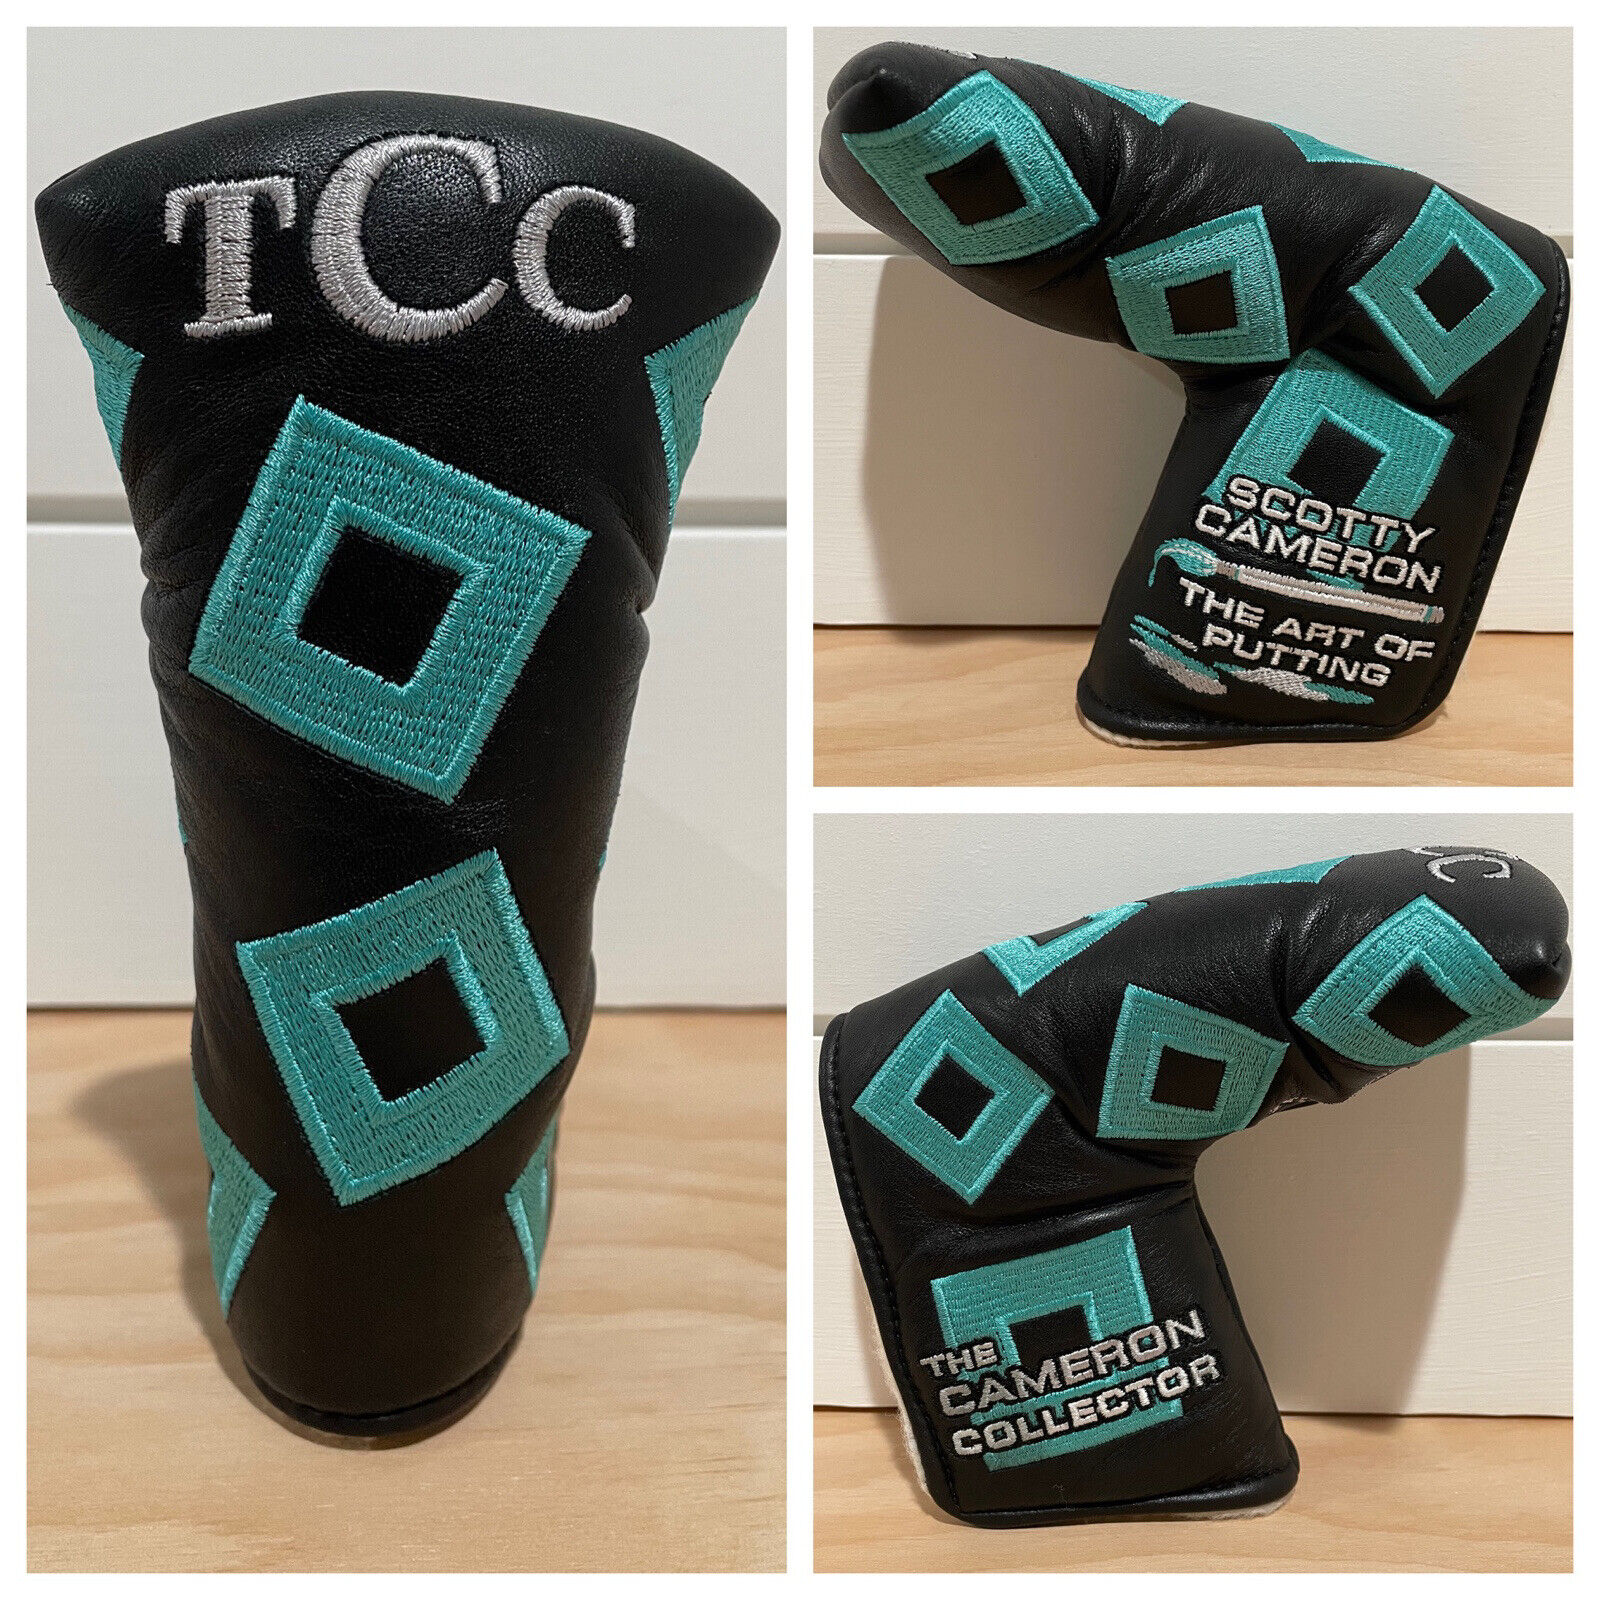 SCOTTY CAMERON HEADCOVER 2010 TCC BLACK LEATHER TIFFANY PUTTER COVER GOLF NEW